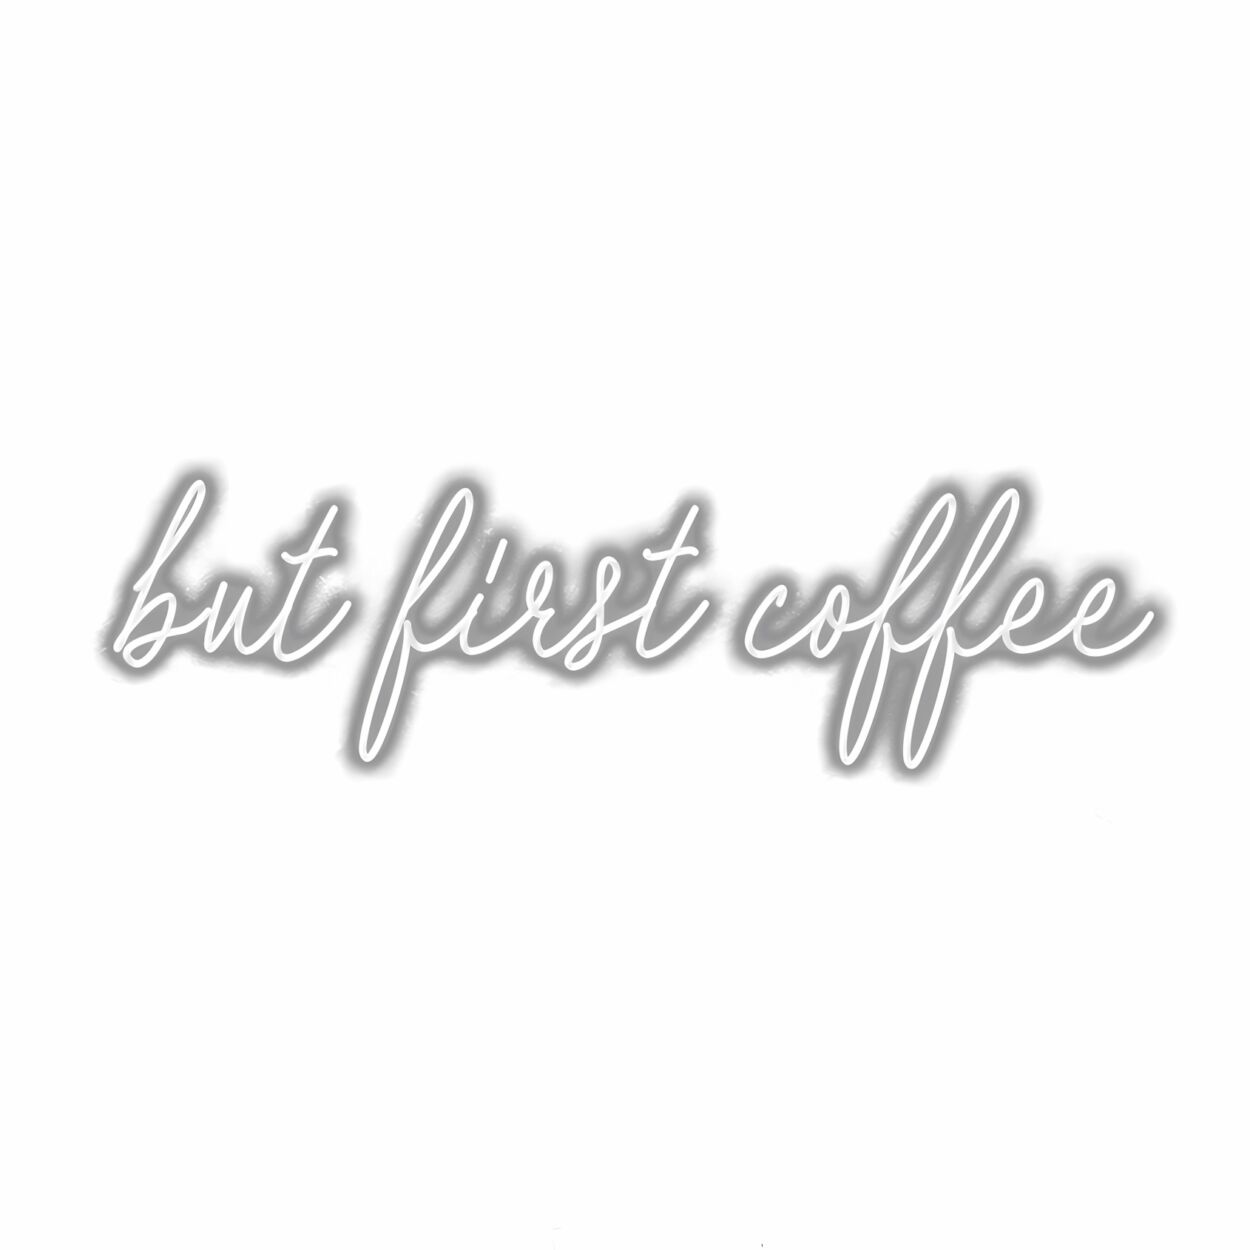 Cursive text saying "but first coffee" on white background.